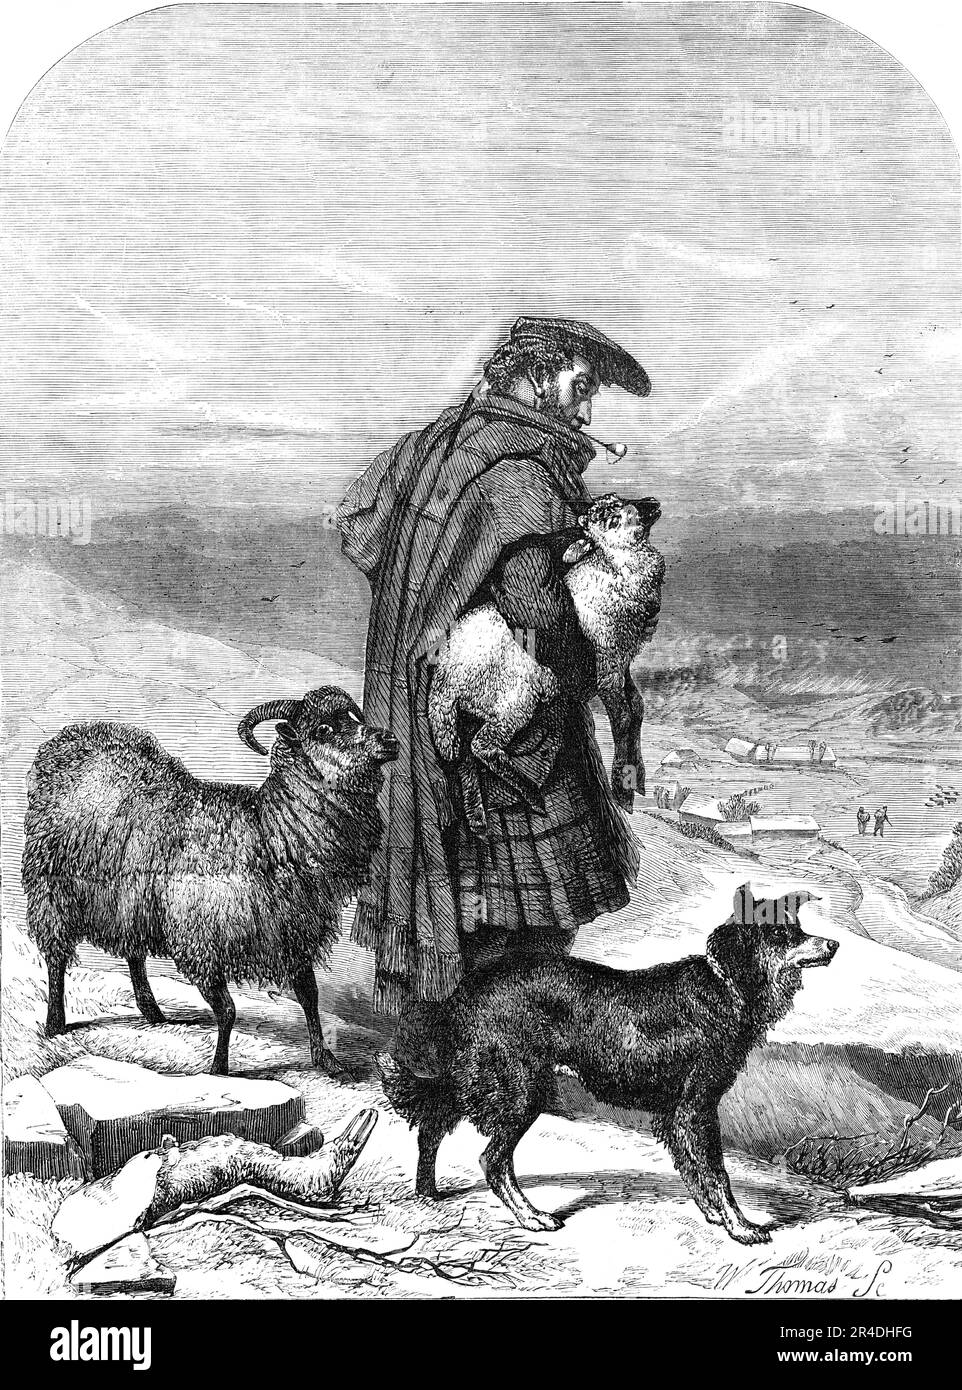 The Highland Shepherd - painted by R. Ansdell - from the Exhibition of the Royal Academy, 1856. Engraving of a painting. '...one of those happy transcripts of Highland life that has made Mr. Ansdell a favourite artist beyond the limits of his native Lancashire'. From &quot;Illustrated London News&quot;, 1856. Stock Photo